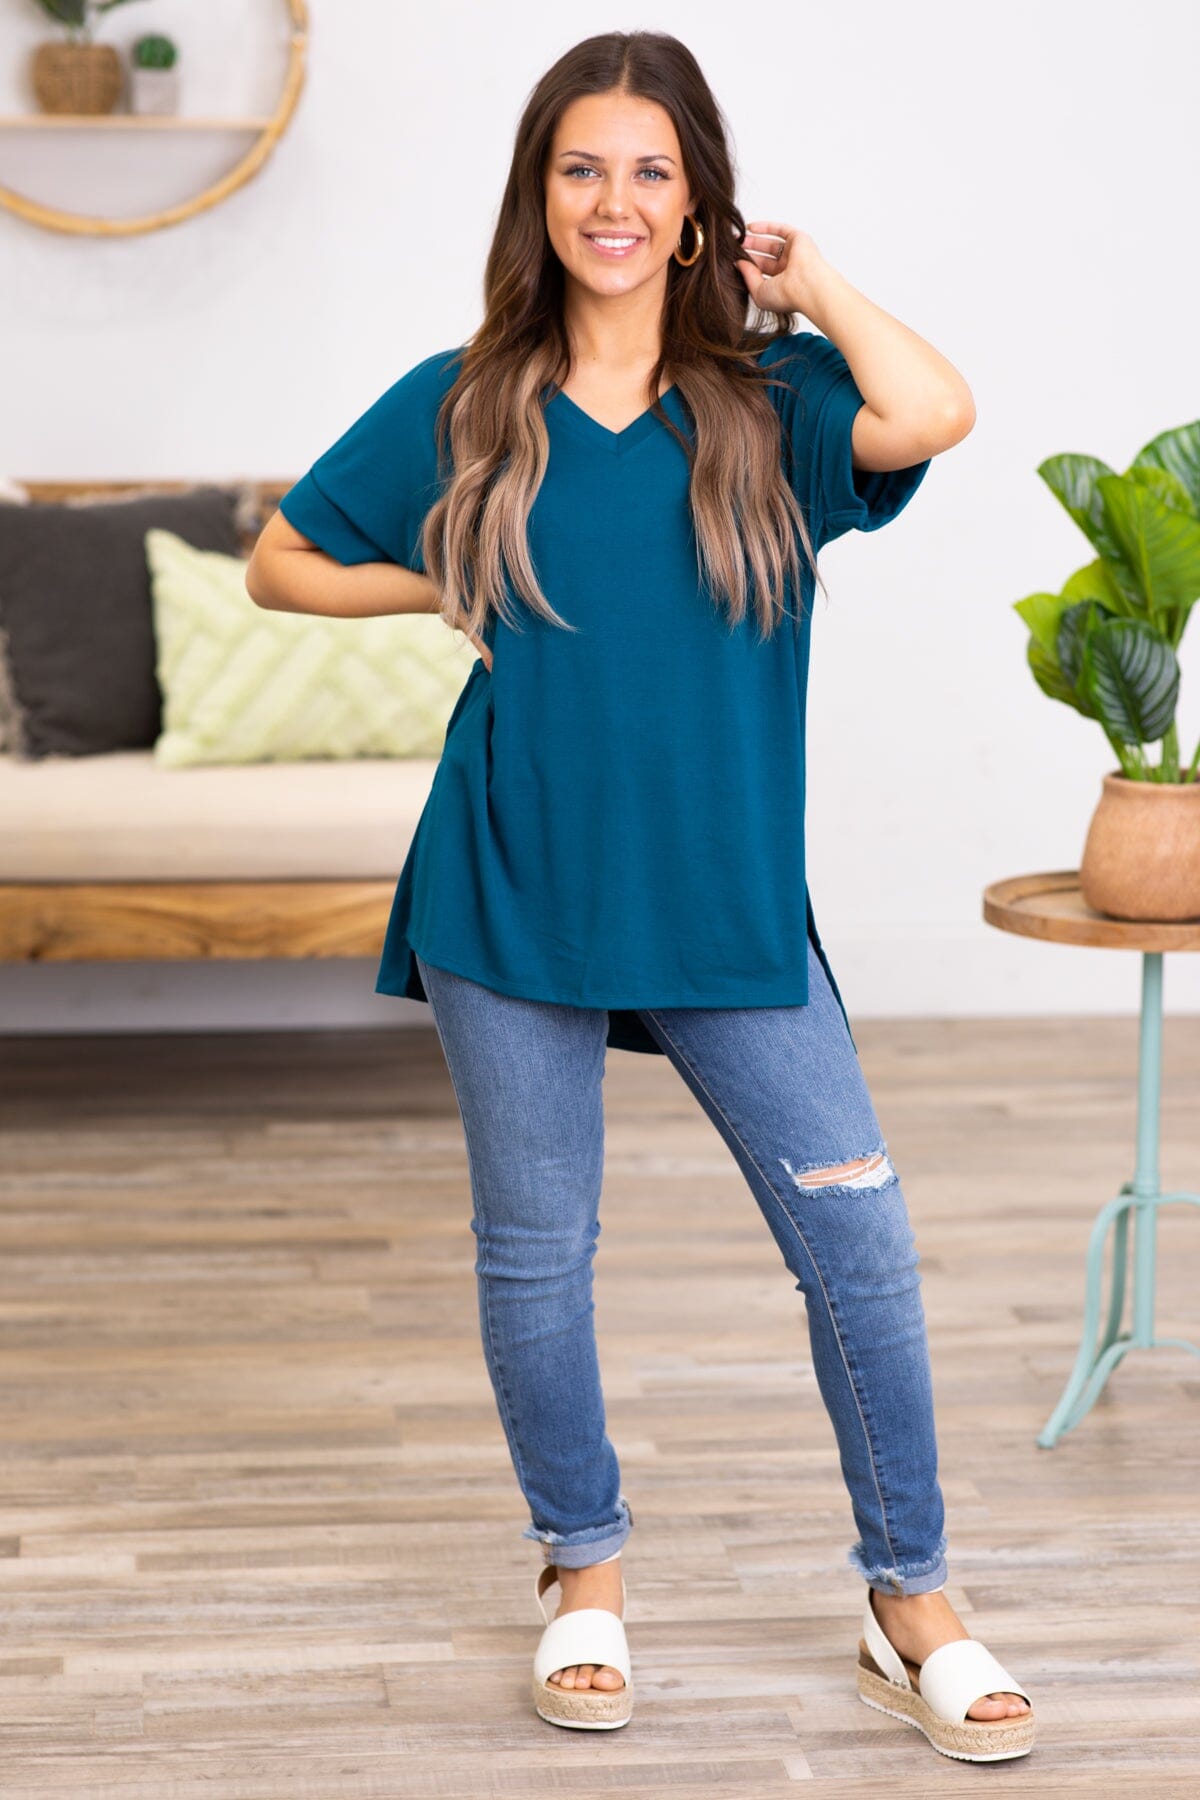 Teal V-Neck Top With Side Slits - Filly Flair